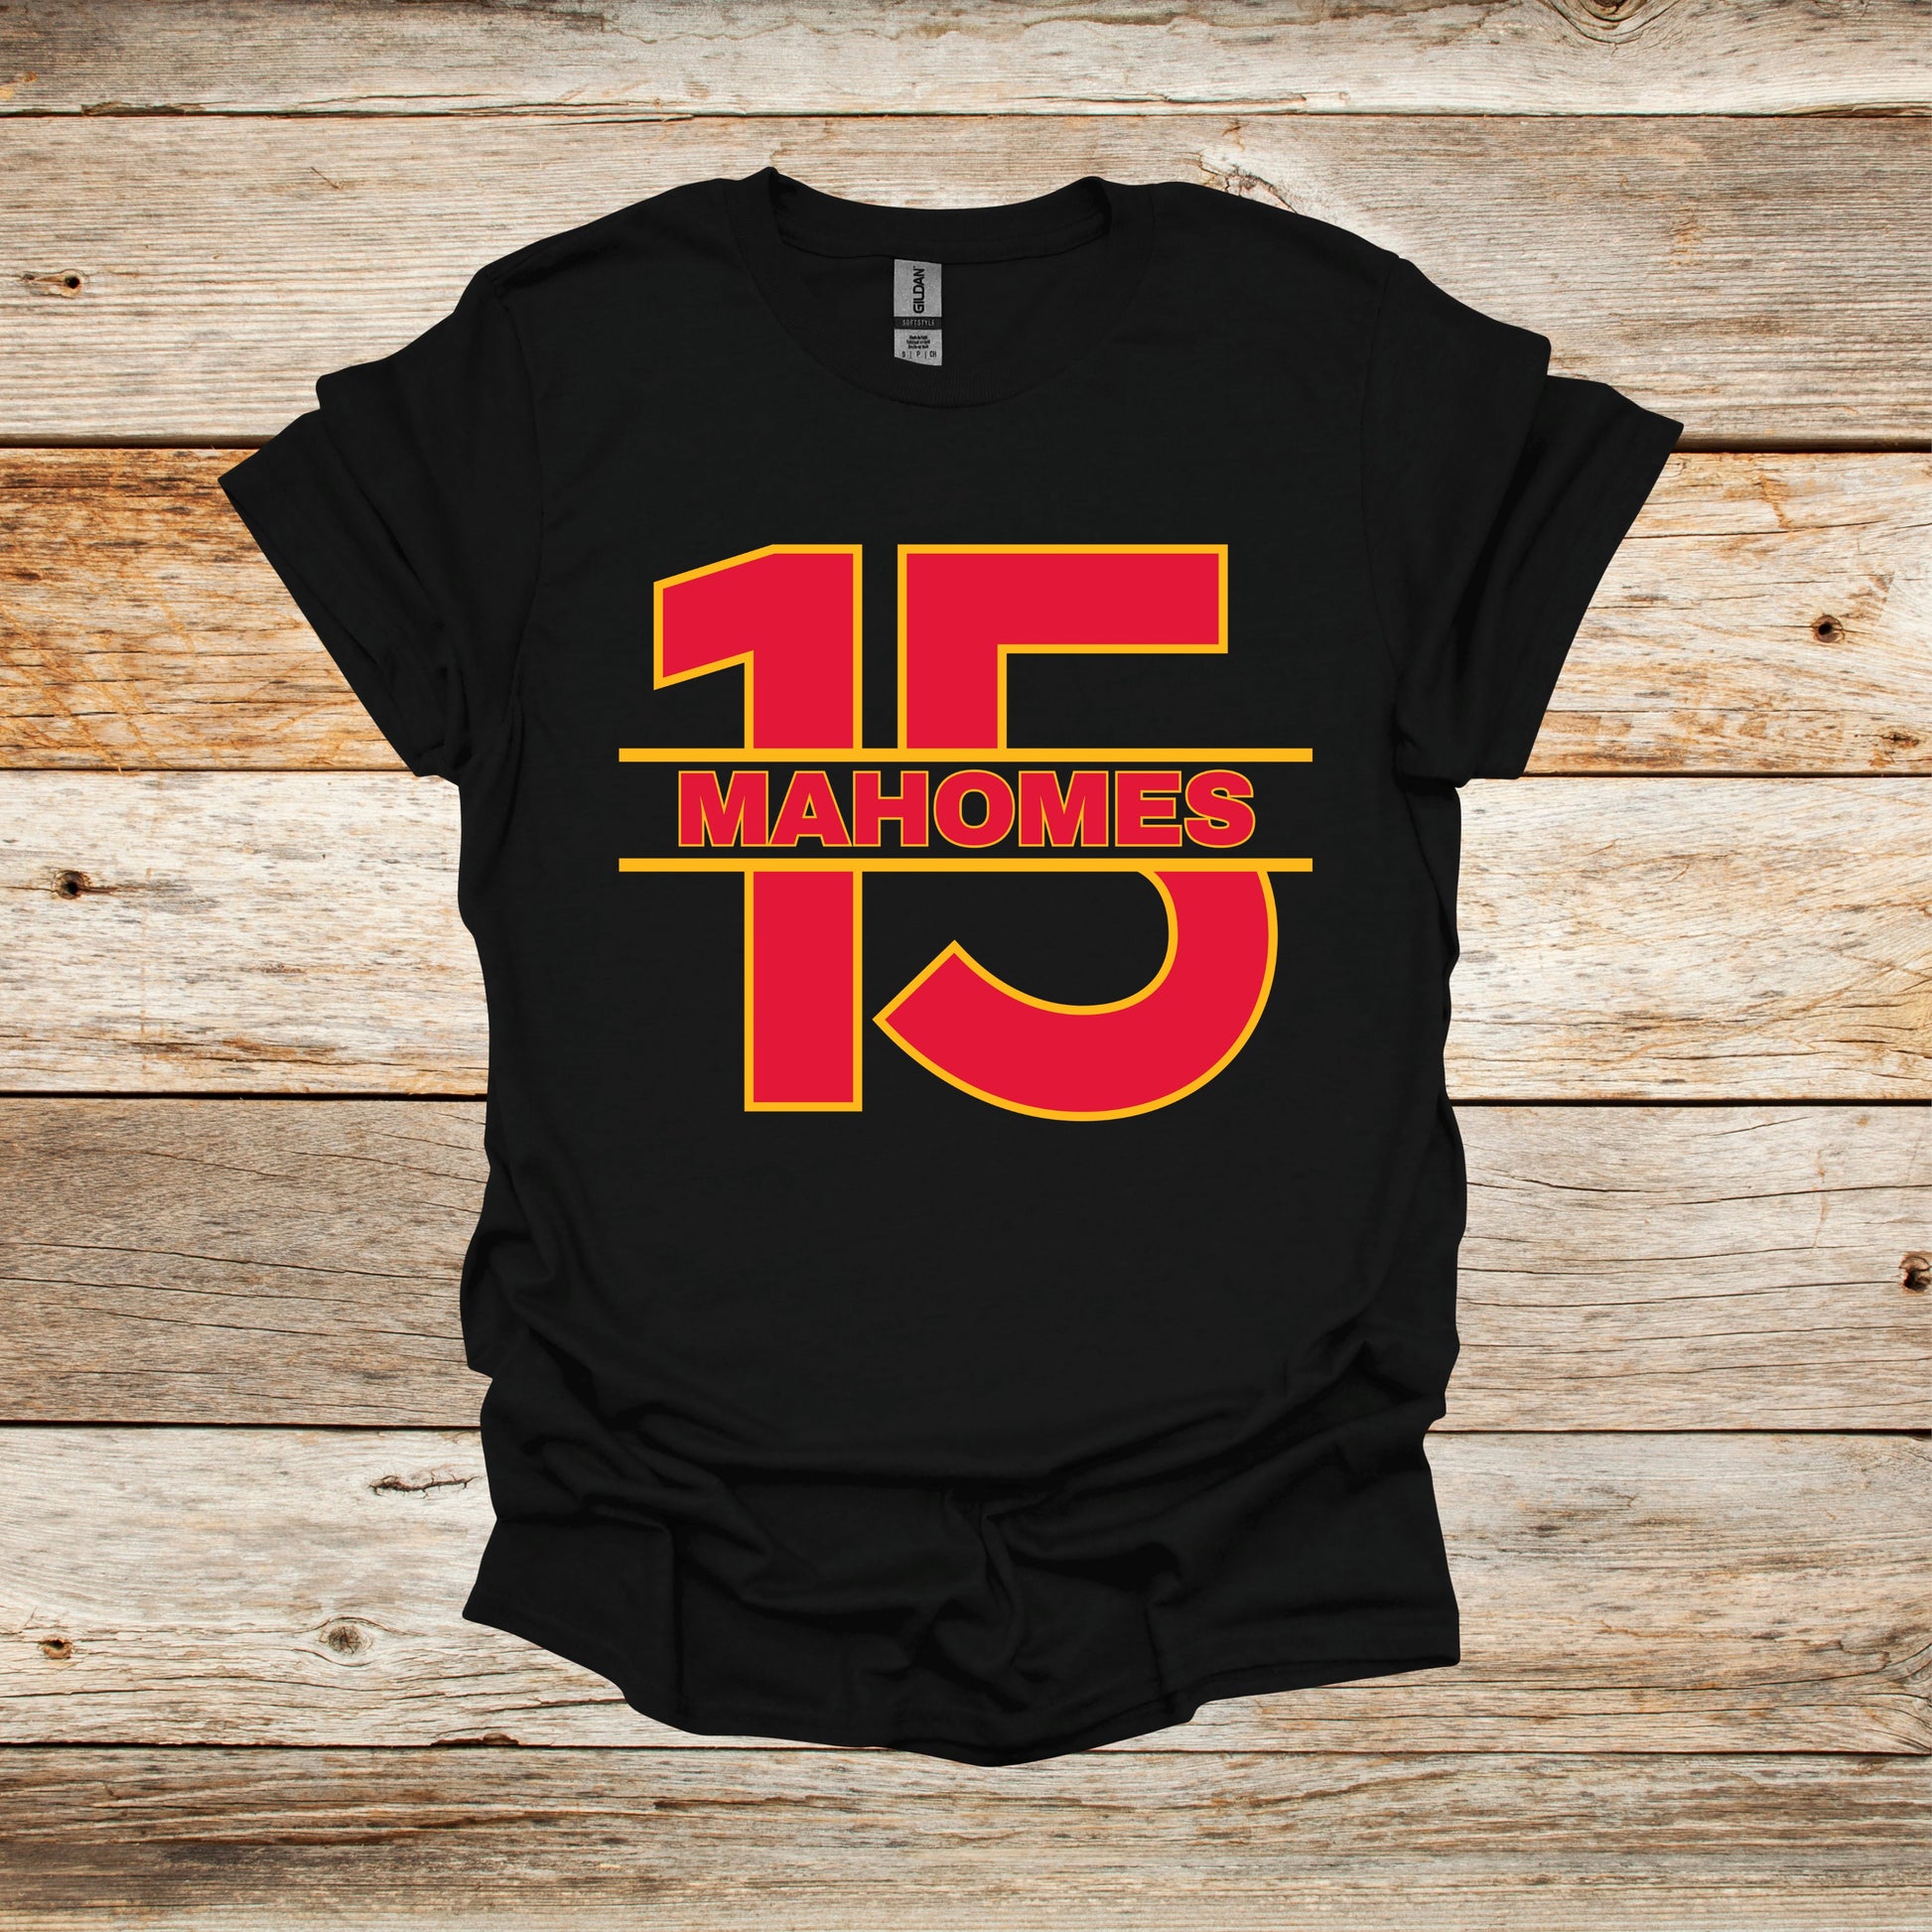 Football T-Shirt - Chiefs Football - 15 Mahomes - Adult and Children's Tee Shirts - Sports T-Shirts Graphic Avenue Black Adult Small 